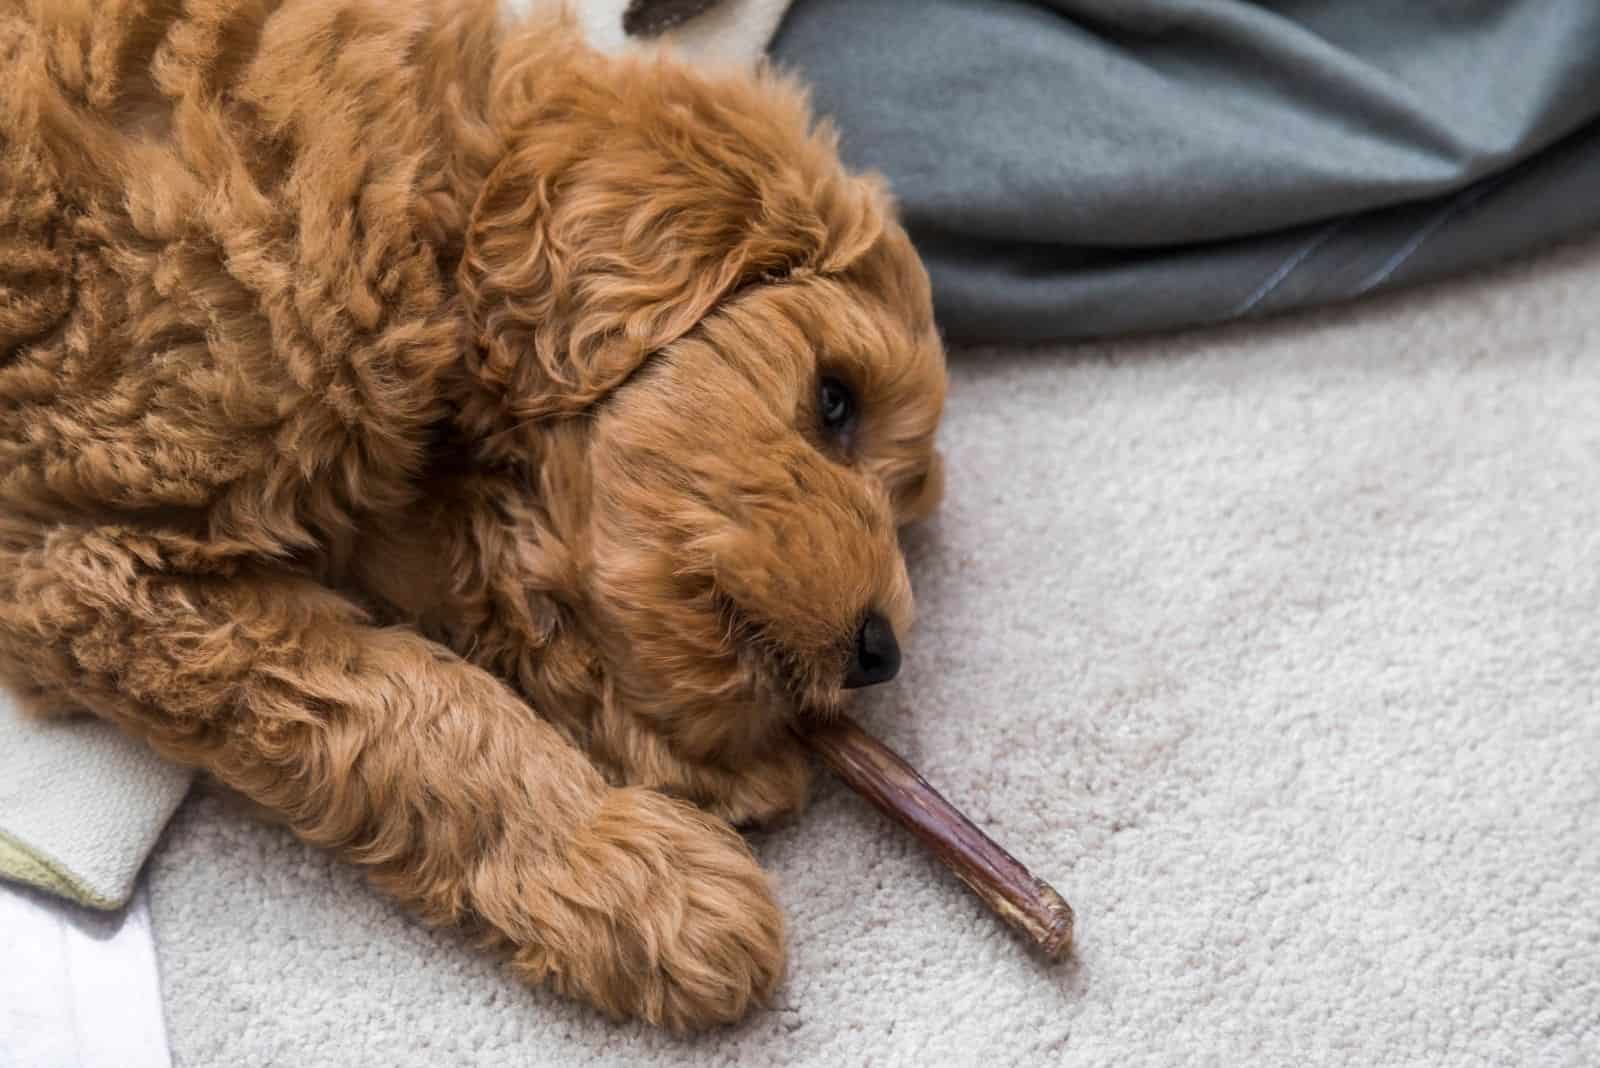 goldendoodle puppy at home lying down at the rug